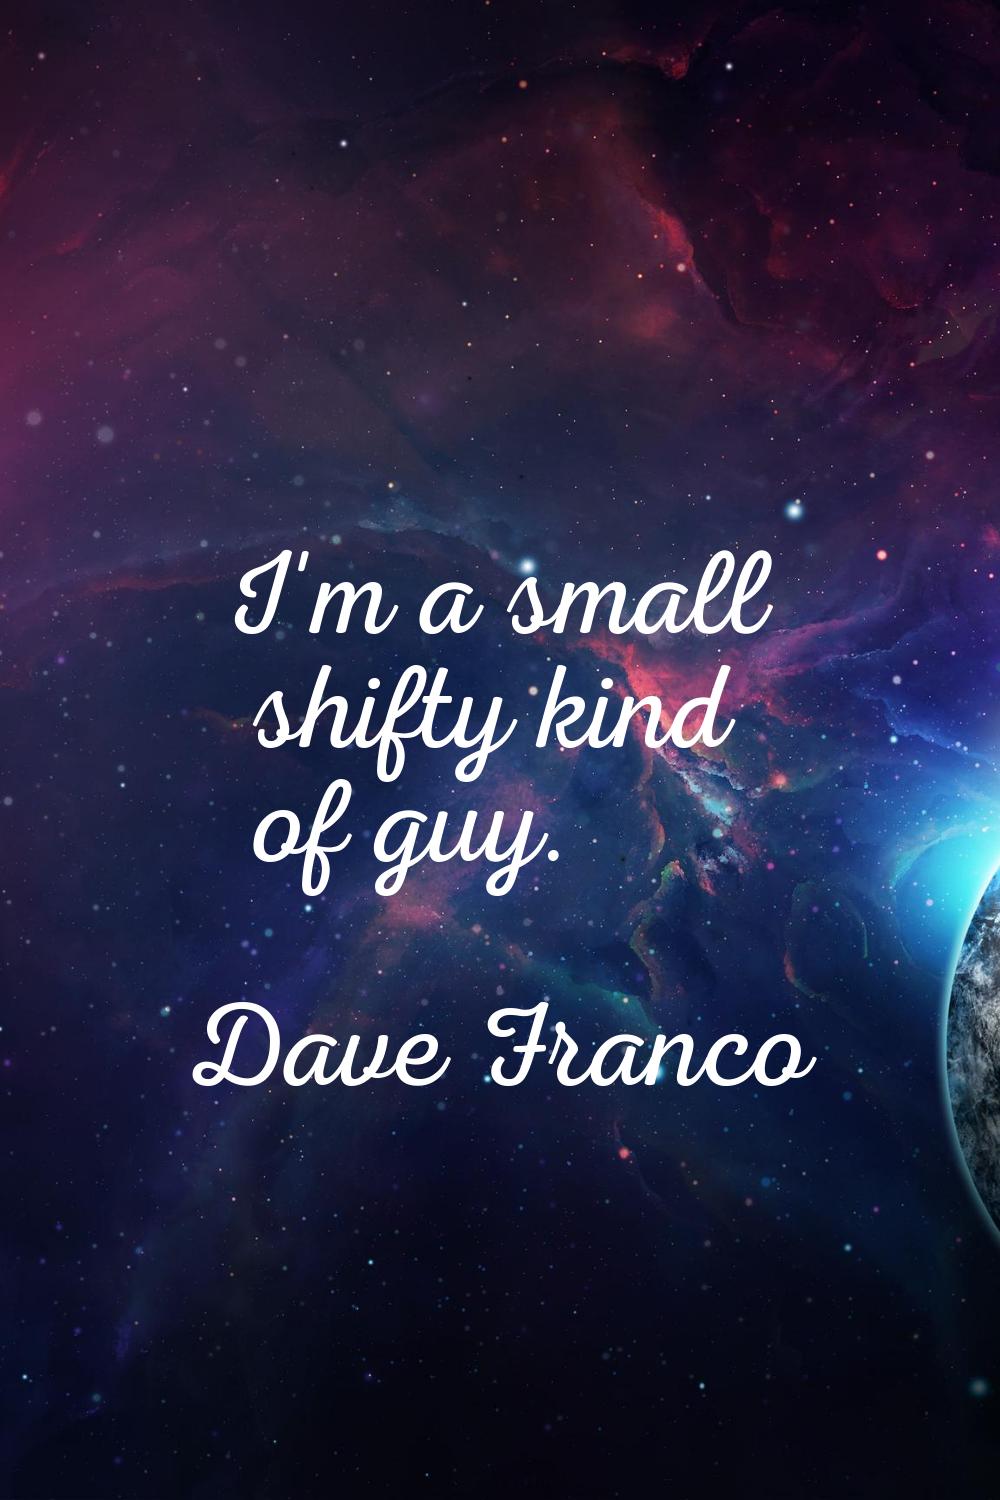 I'm a small shifty kind of guy.